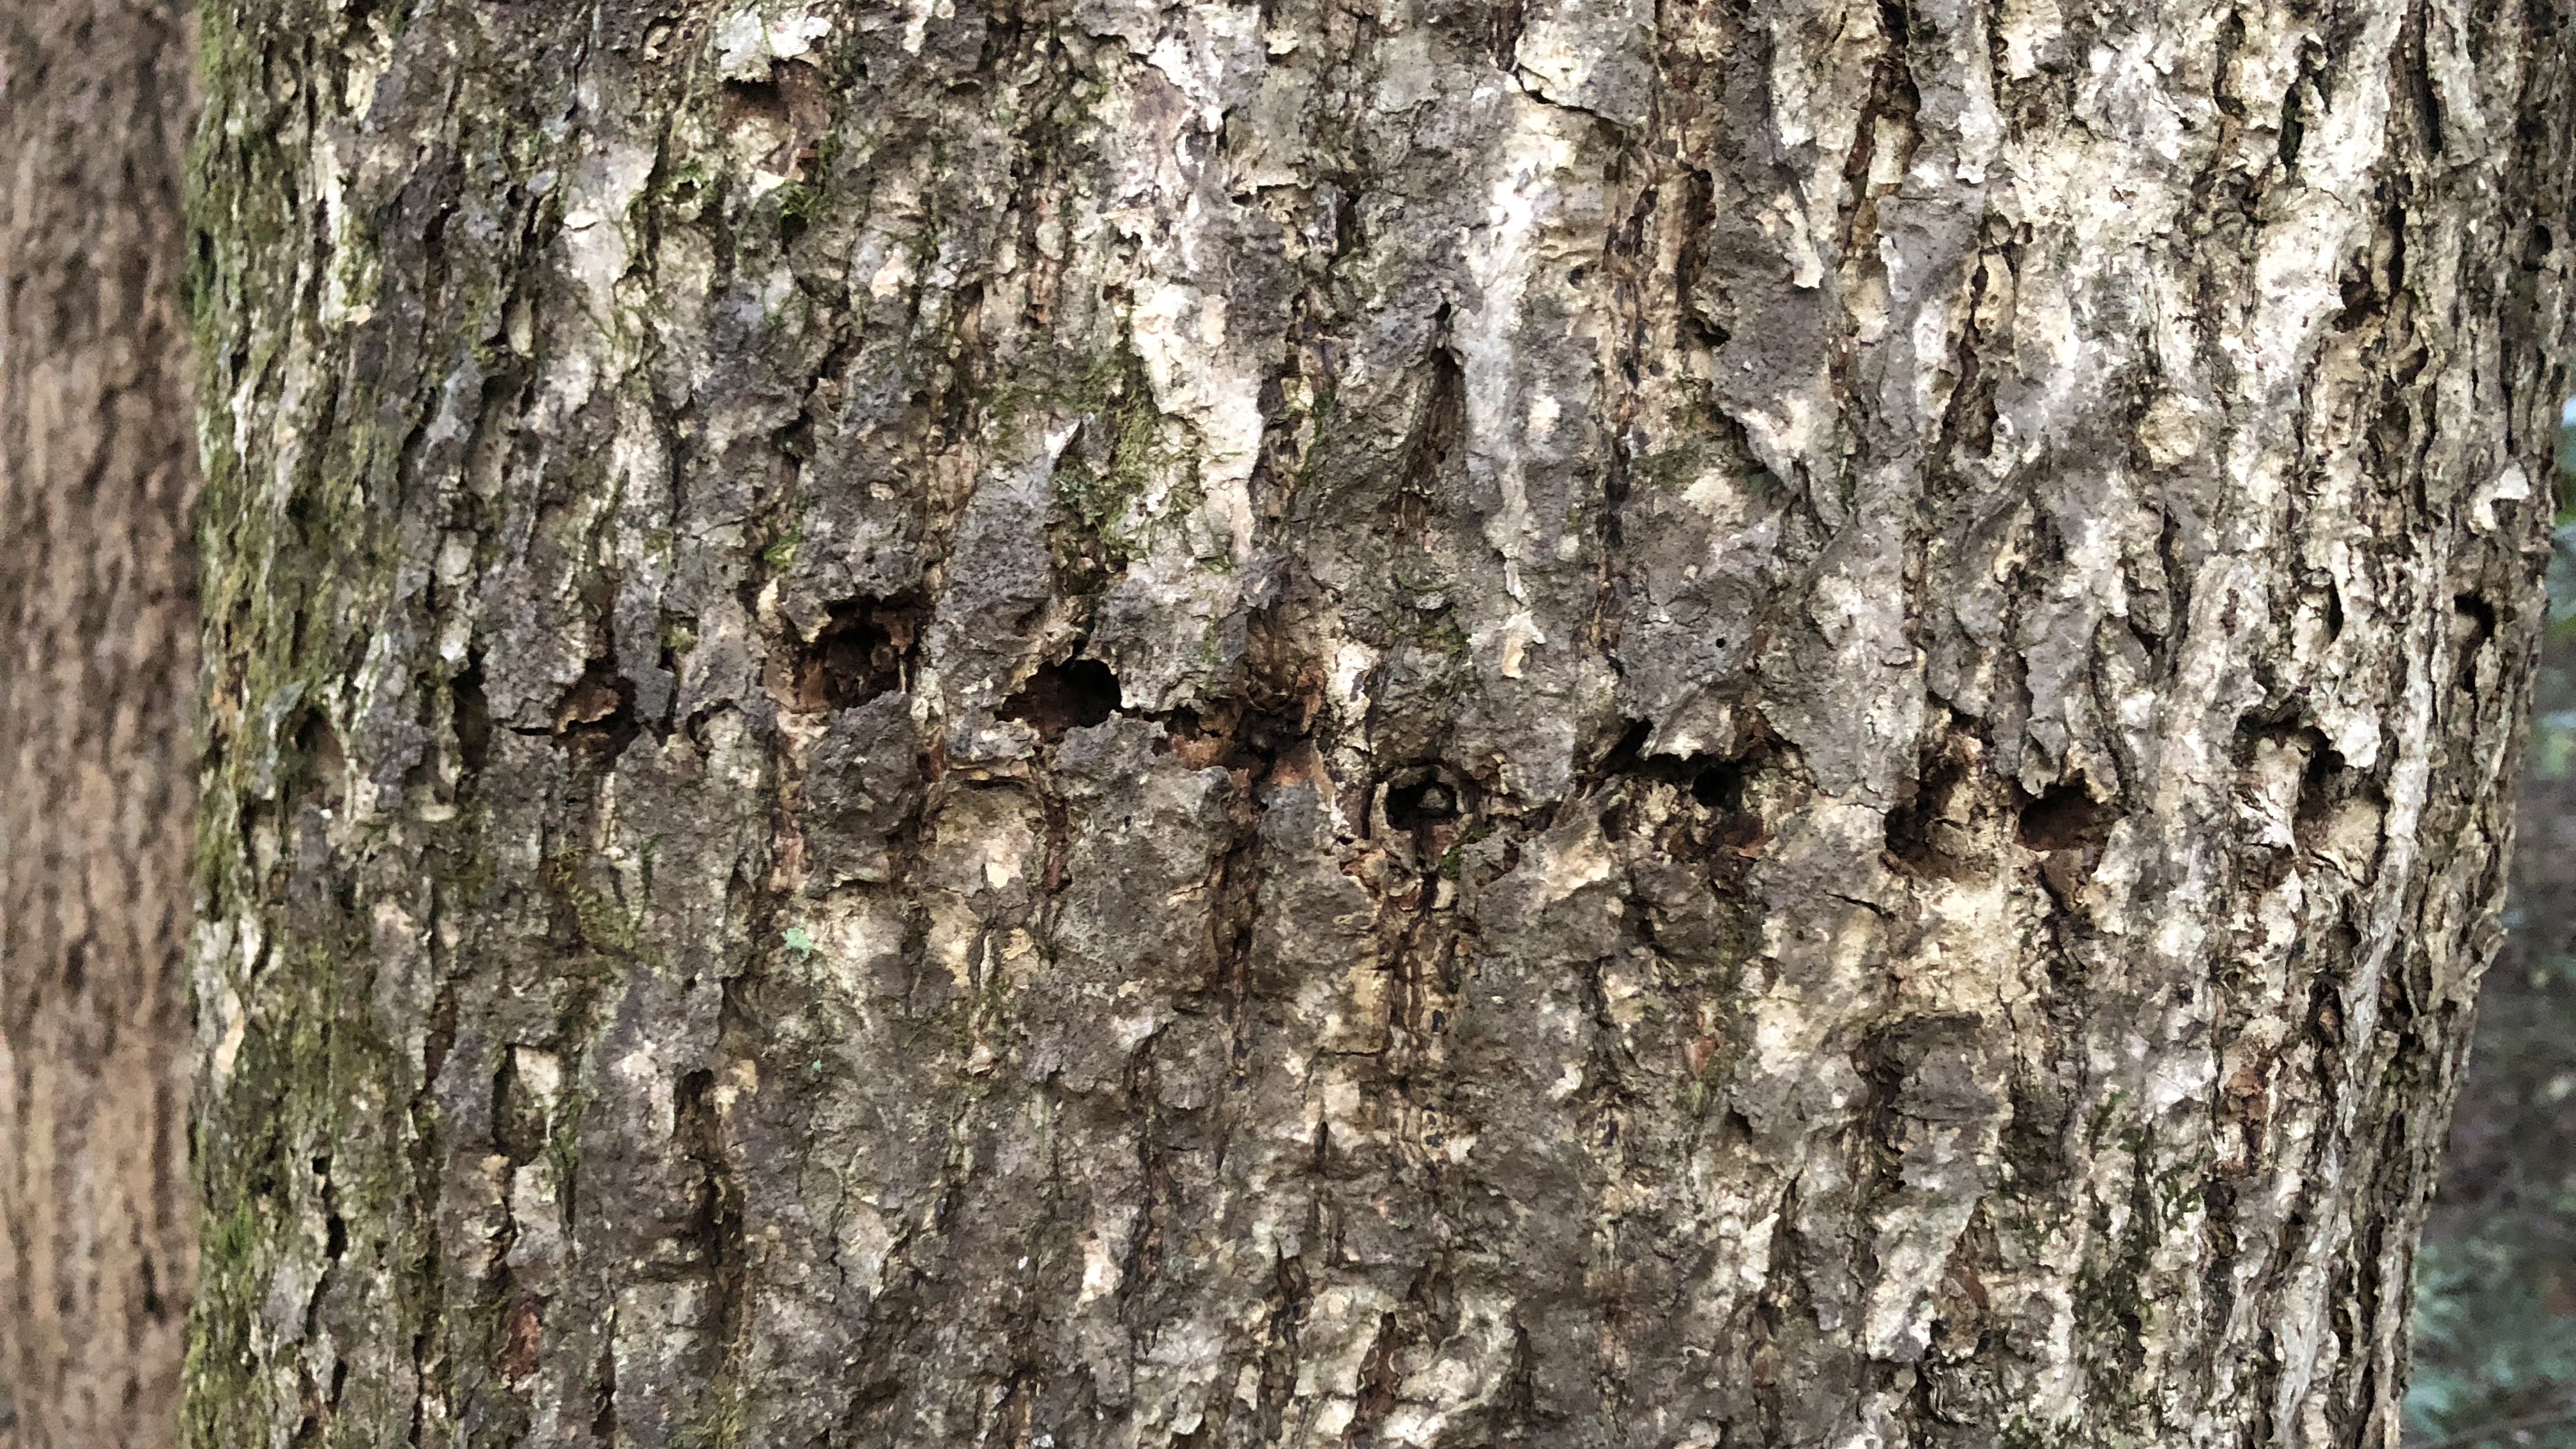 More invasive trunk damage that could have started with borer damage. 